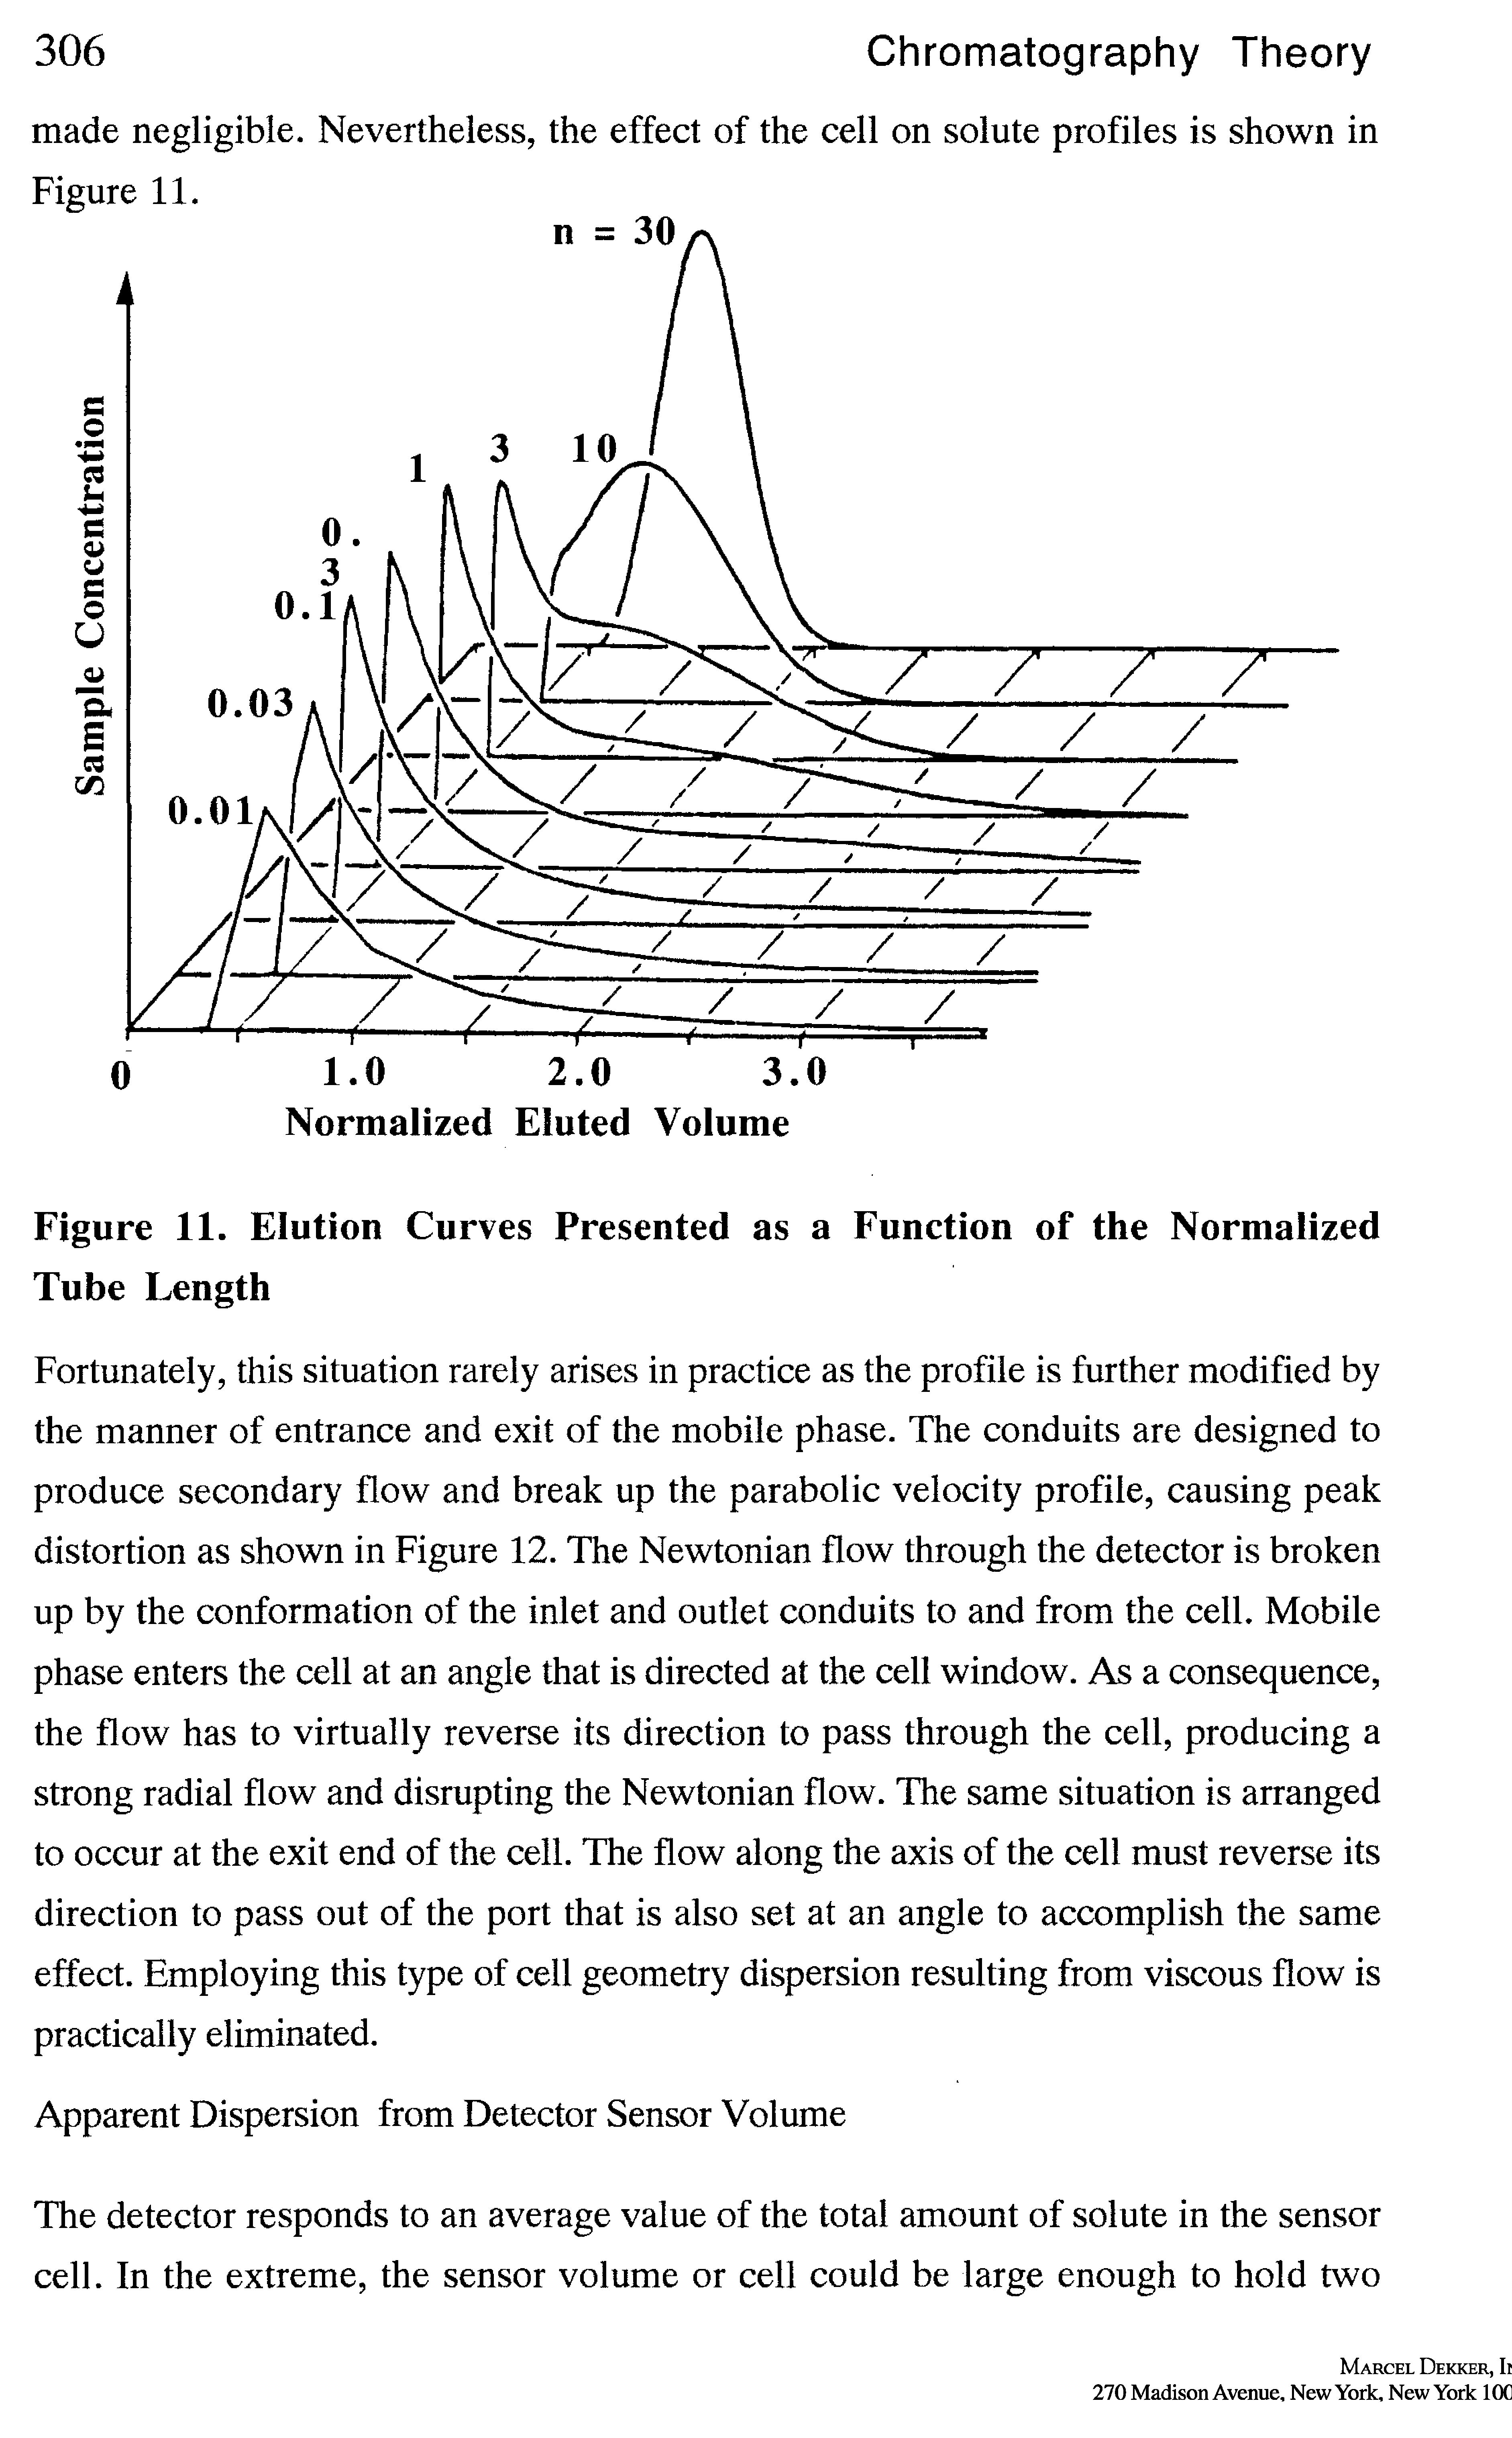 Figure 11. Elution Curves Presented as a Function of the Normalized Tube Length...